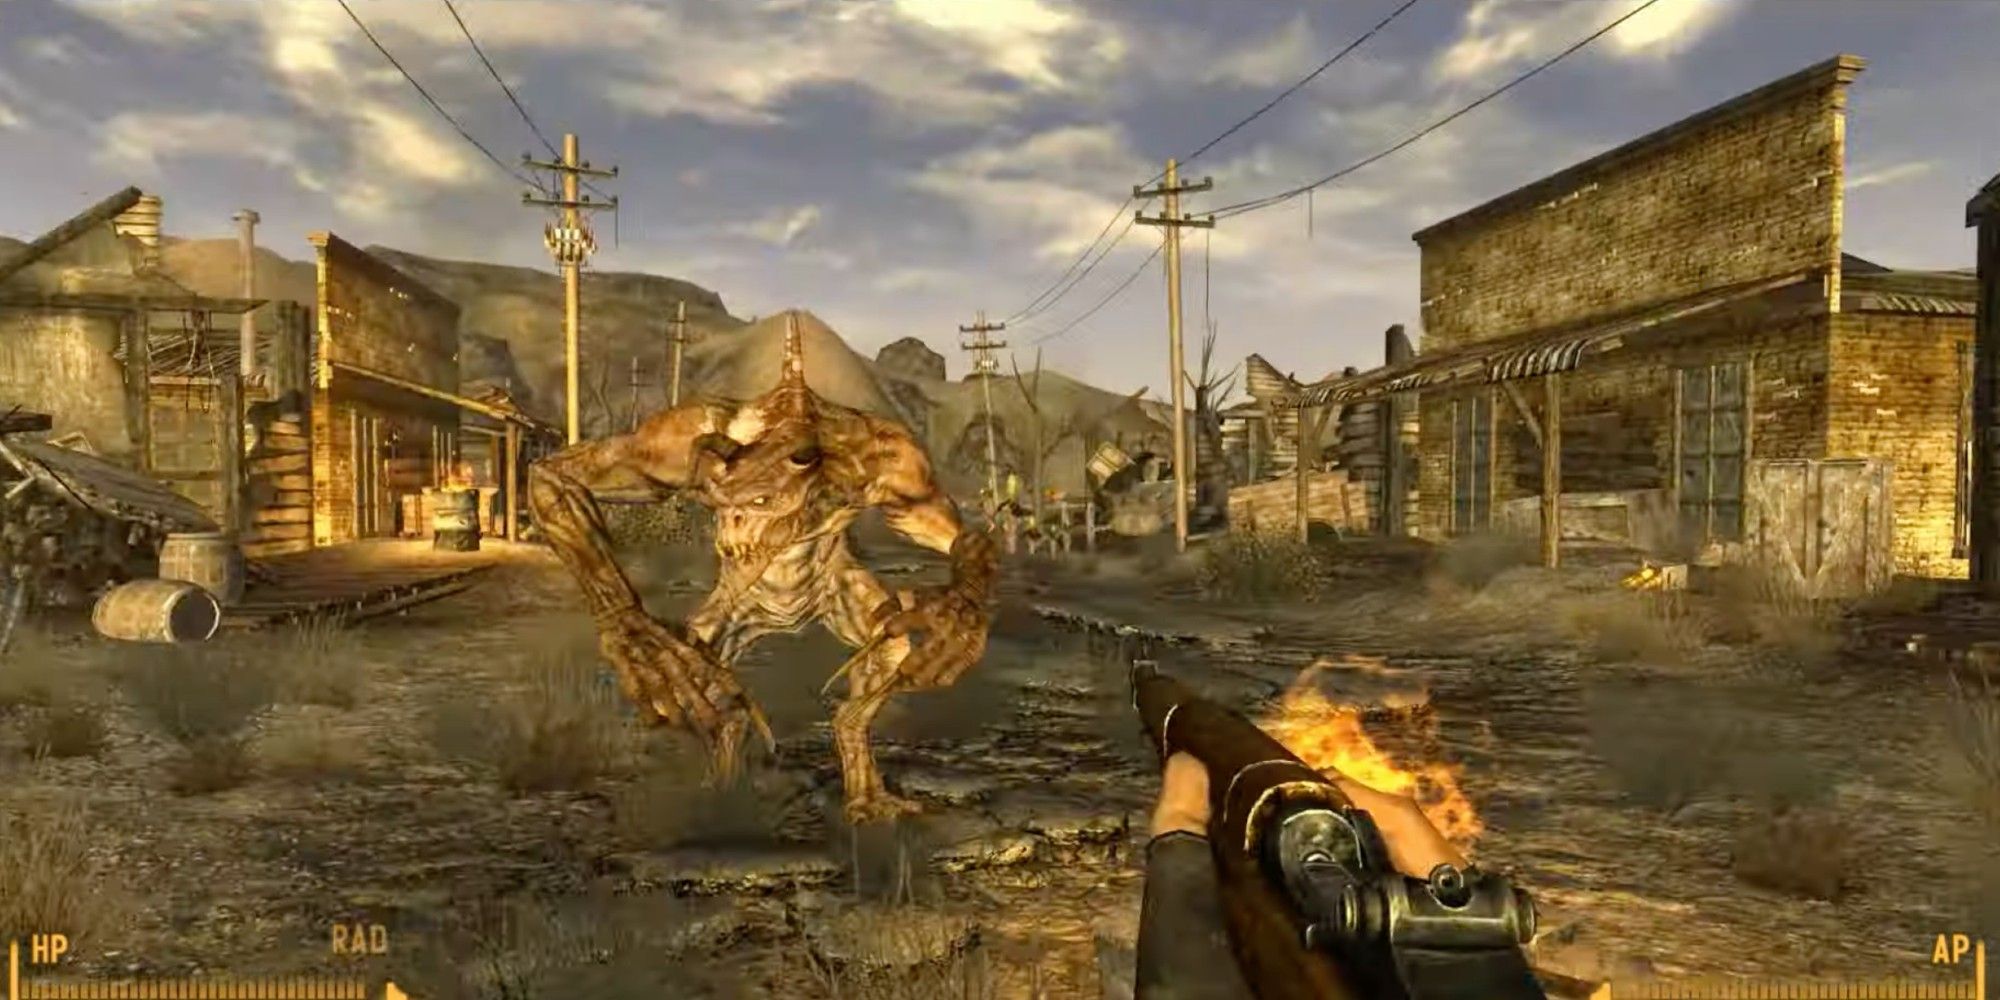 Deathclaw Fallout 3 surprising you as you turn around